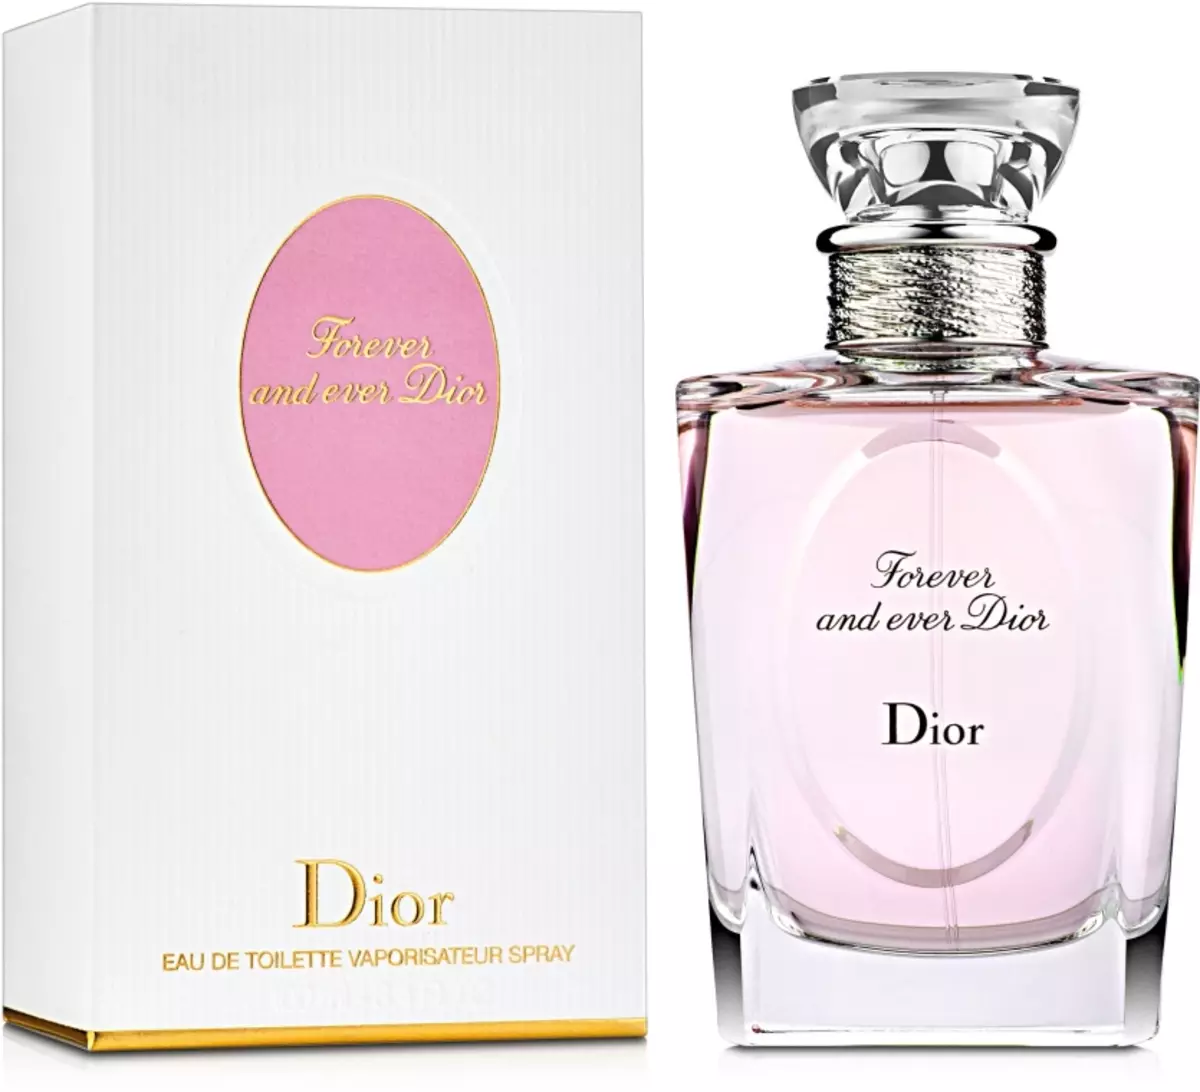 Perfume with freesia smell: perfume and dressing water with a flower aroma for women, how to choose 23406_10